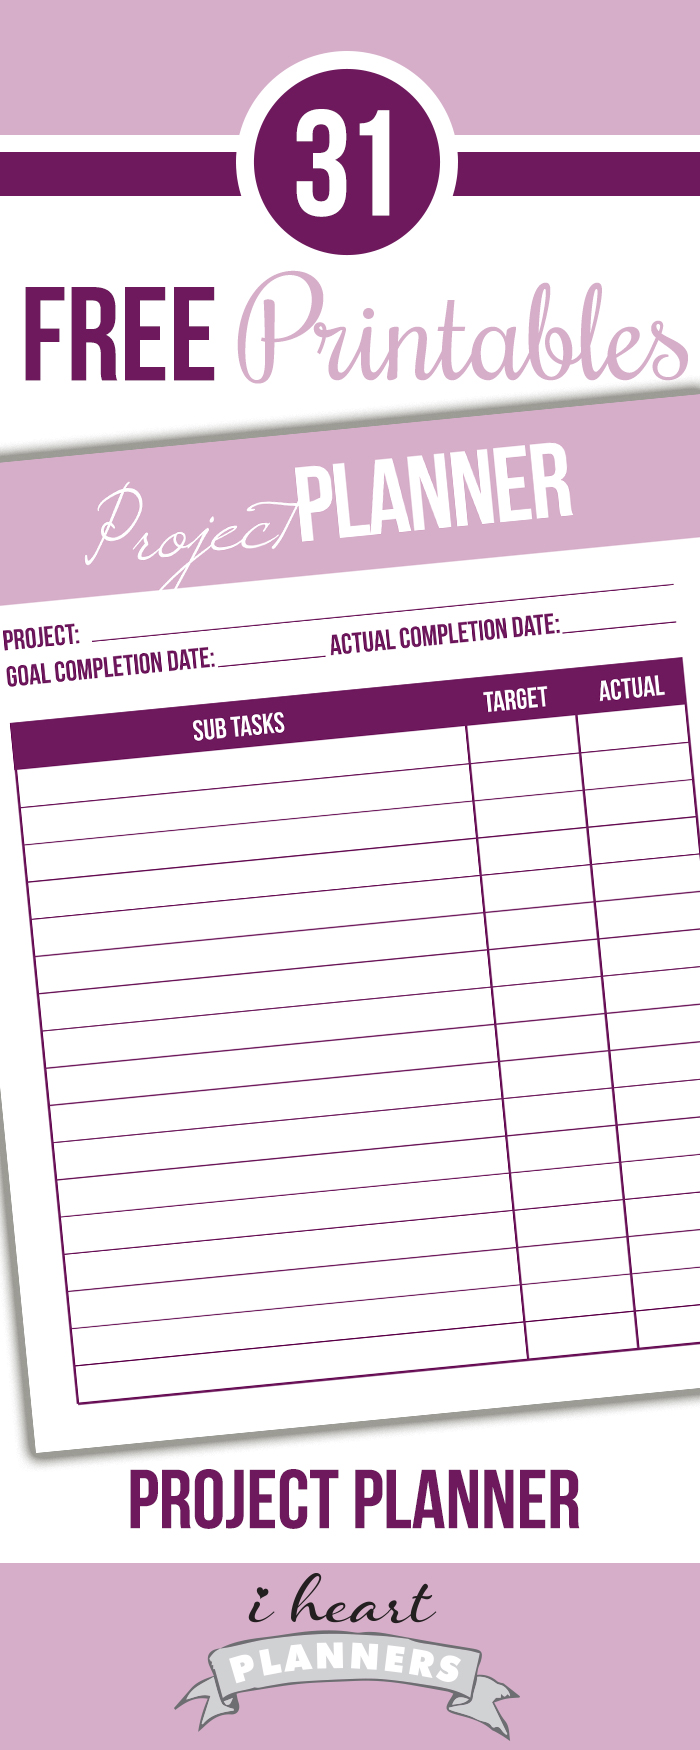 Free printable project planner!